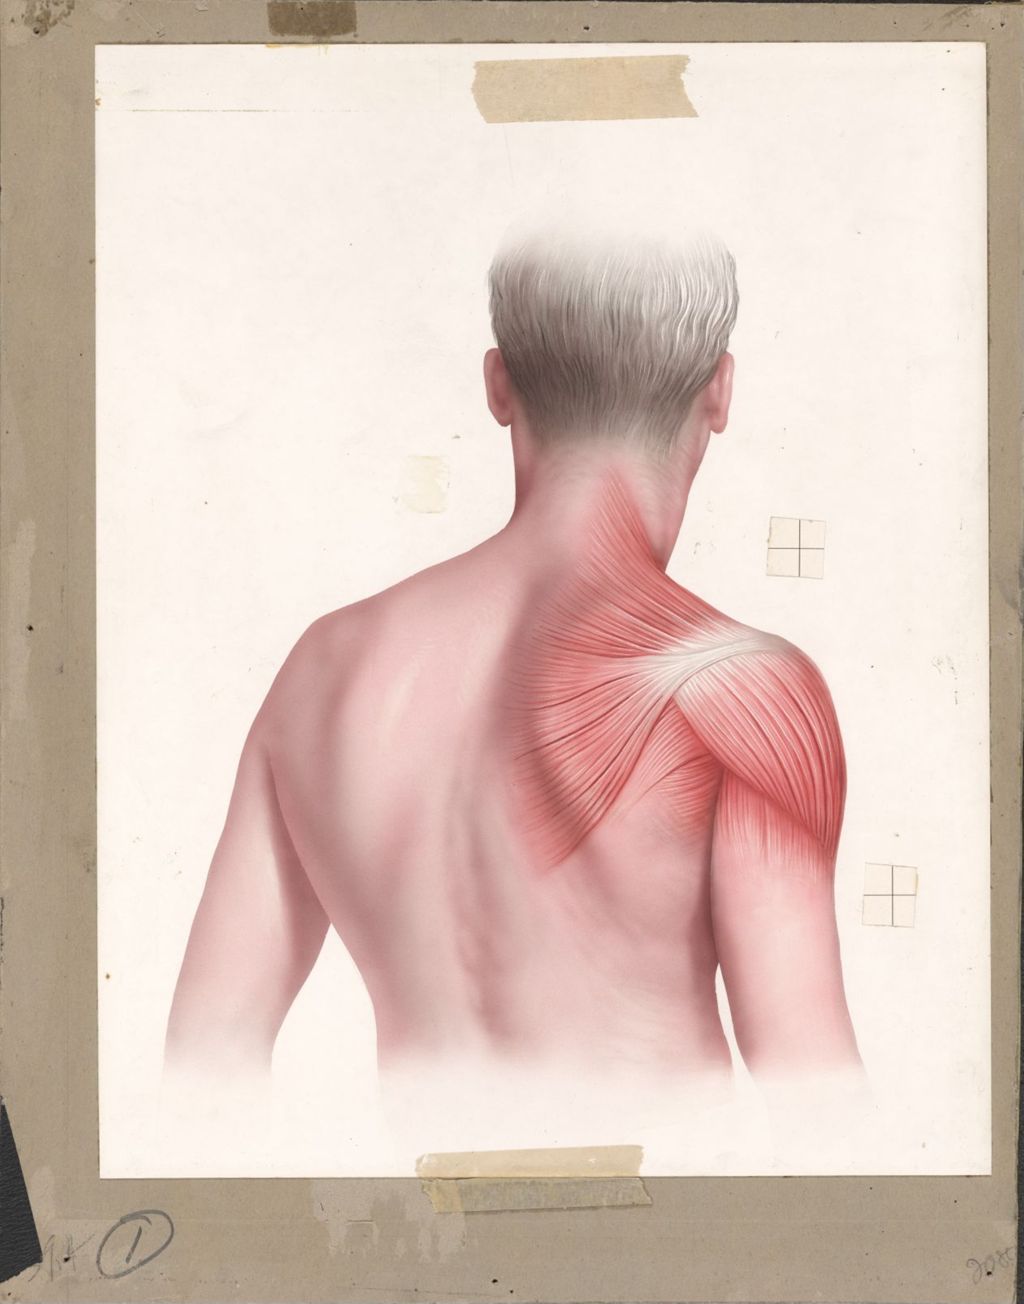 Miniature of Normal Relaxed Muscles of Shoulder